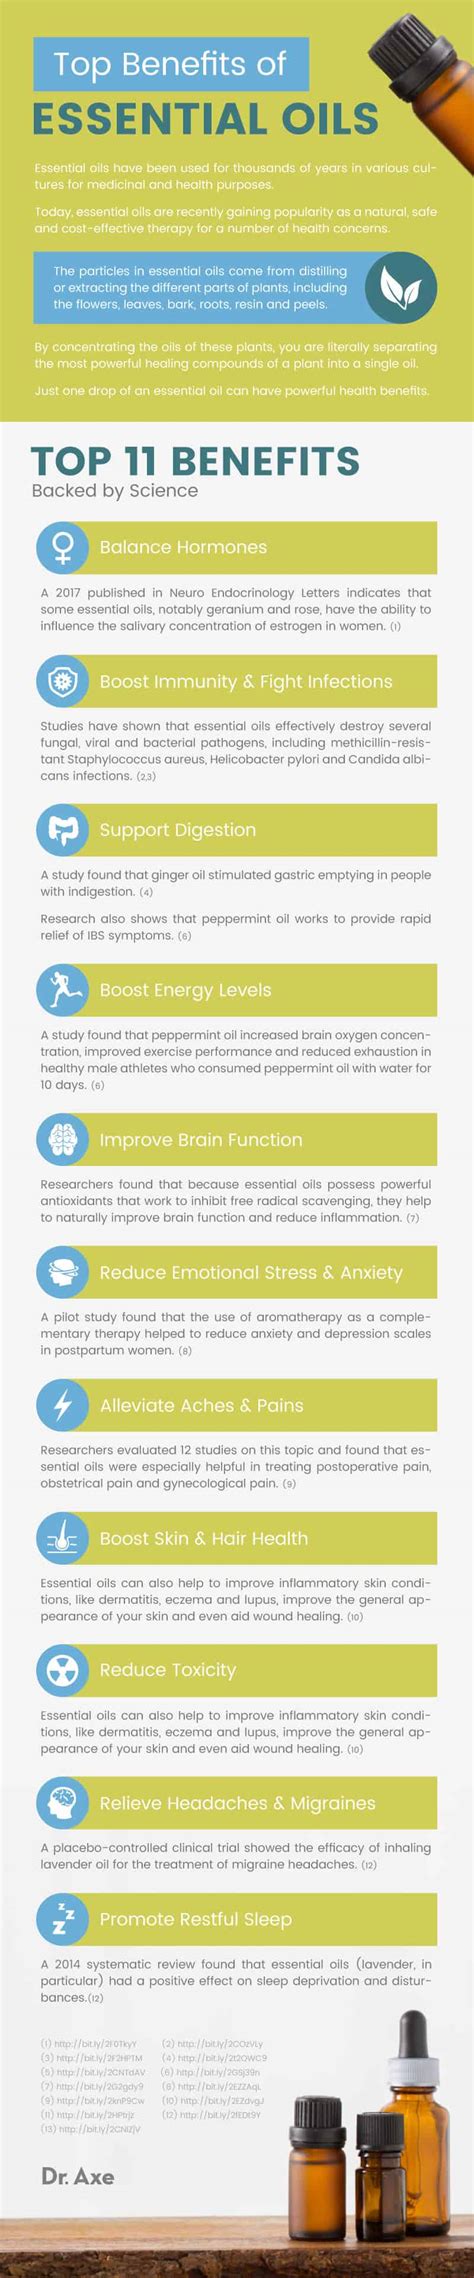 Essential Oils Main Benefits And Uses Dr Axe